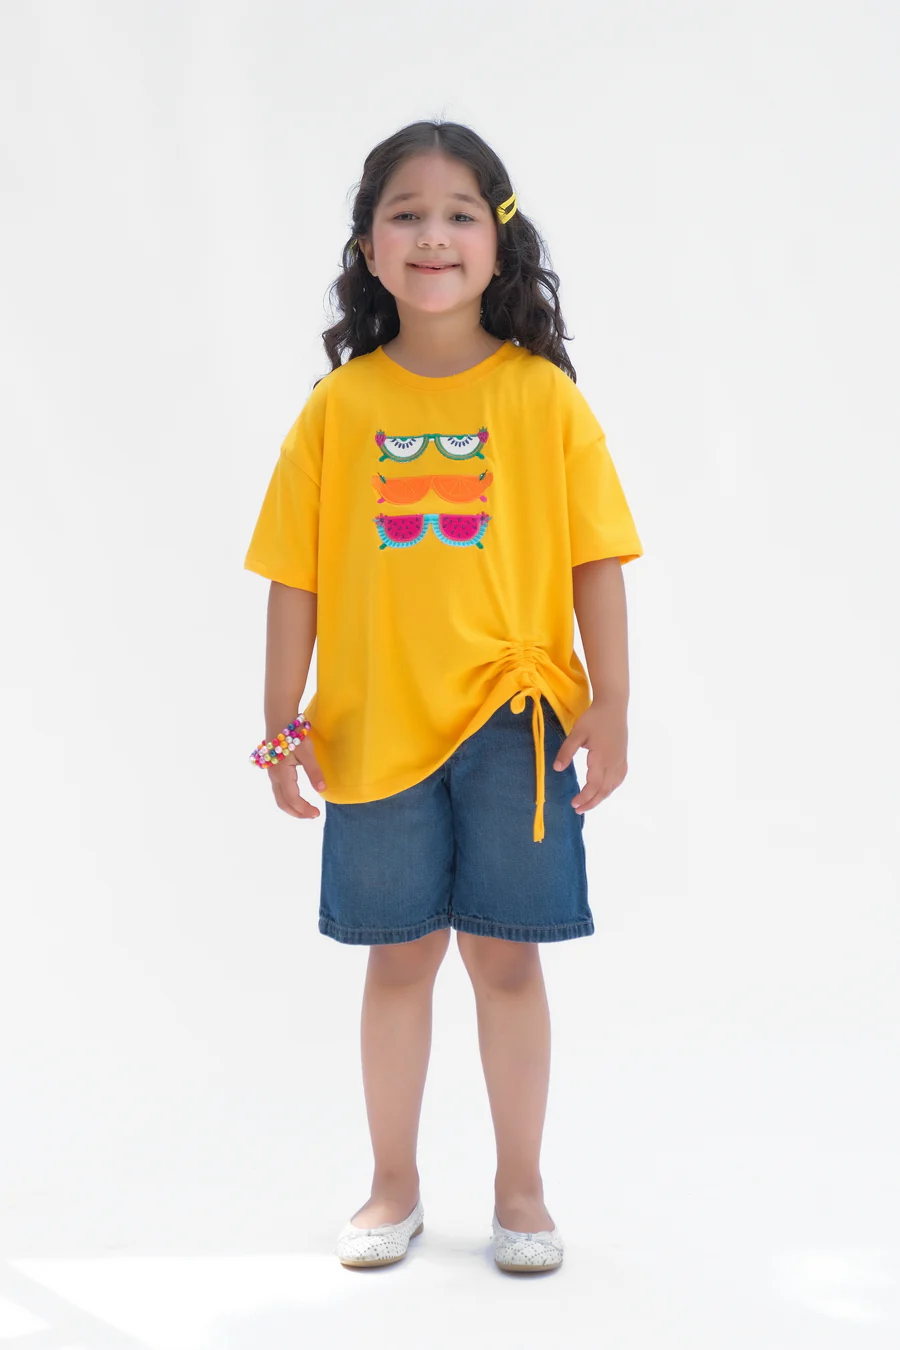 Glasses With Embroidery - Half Sleeves T-Shirts For Kids - Yellow - SBT-364